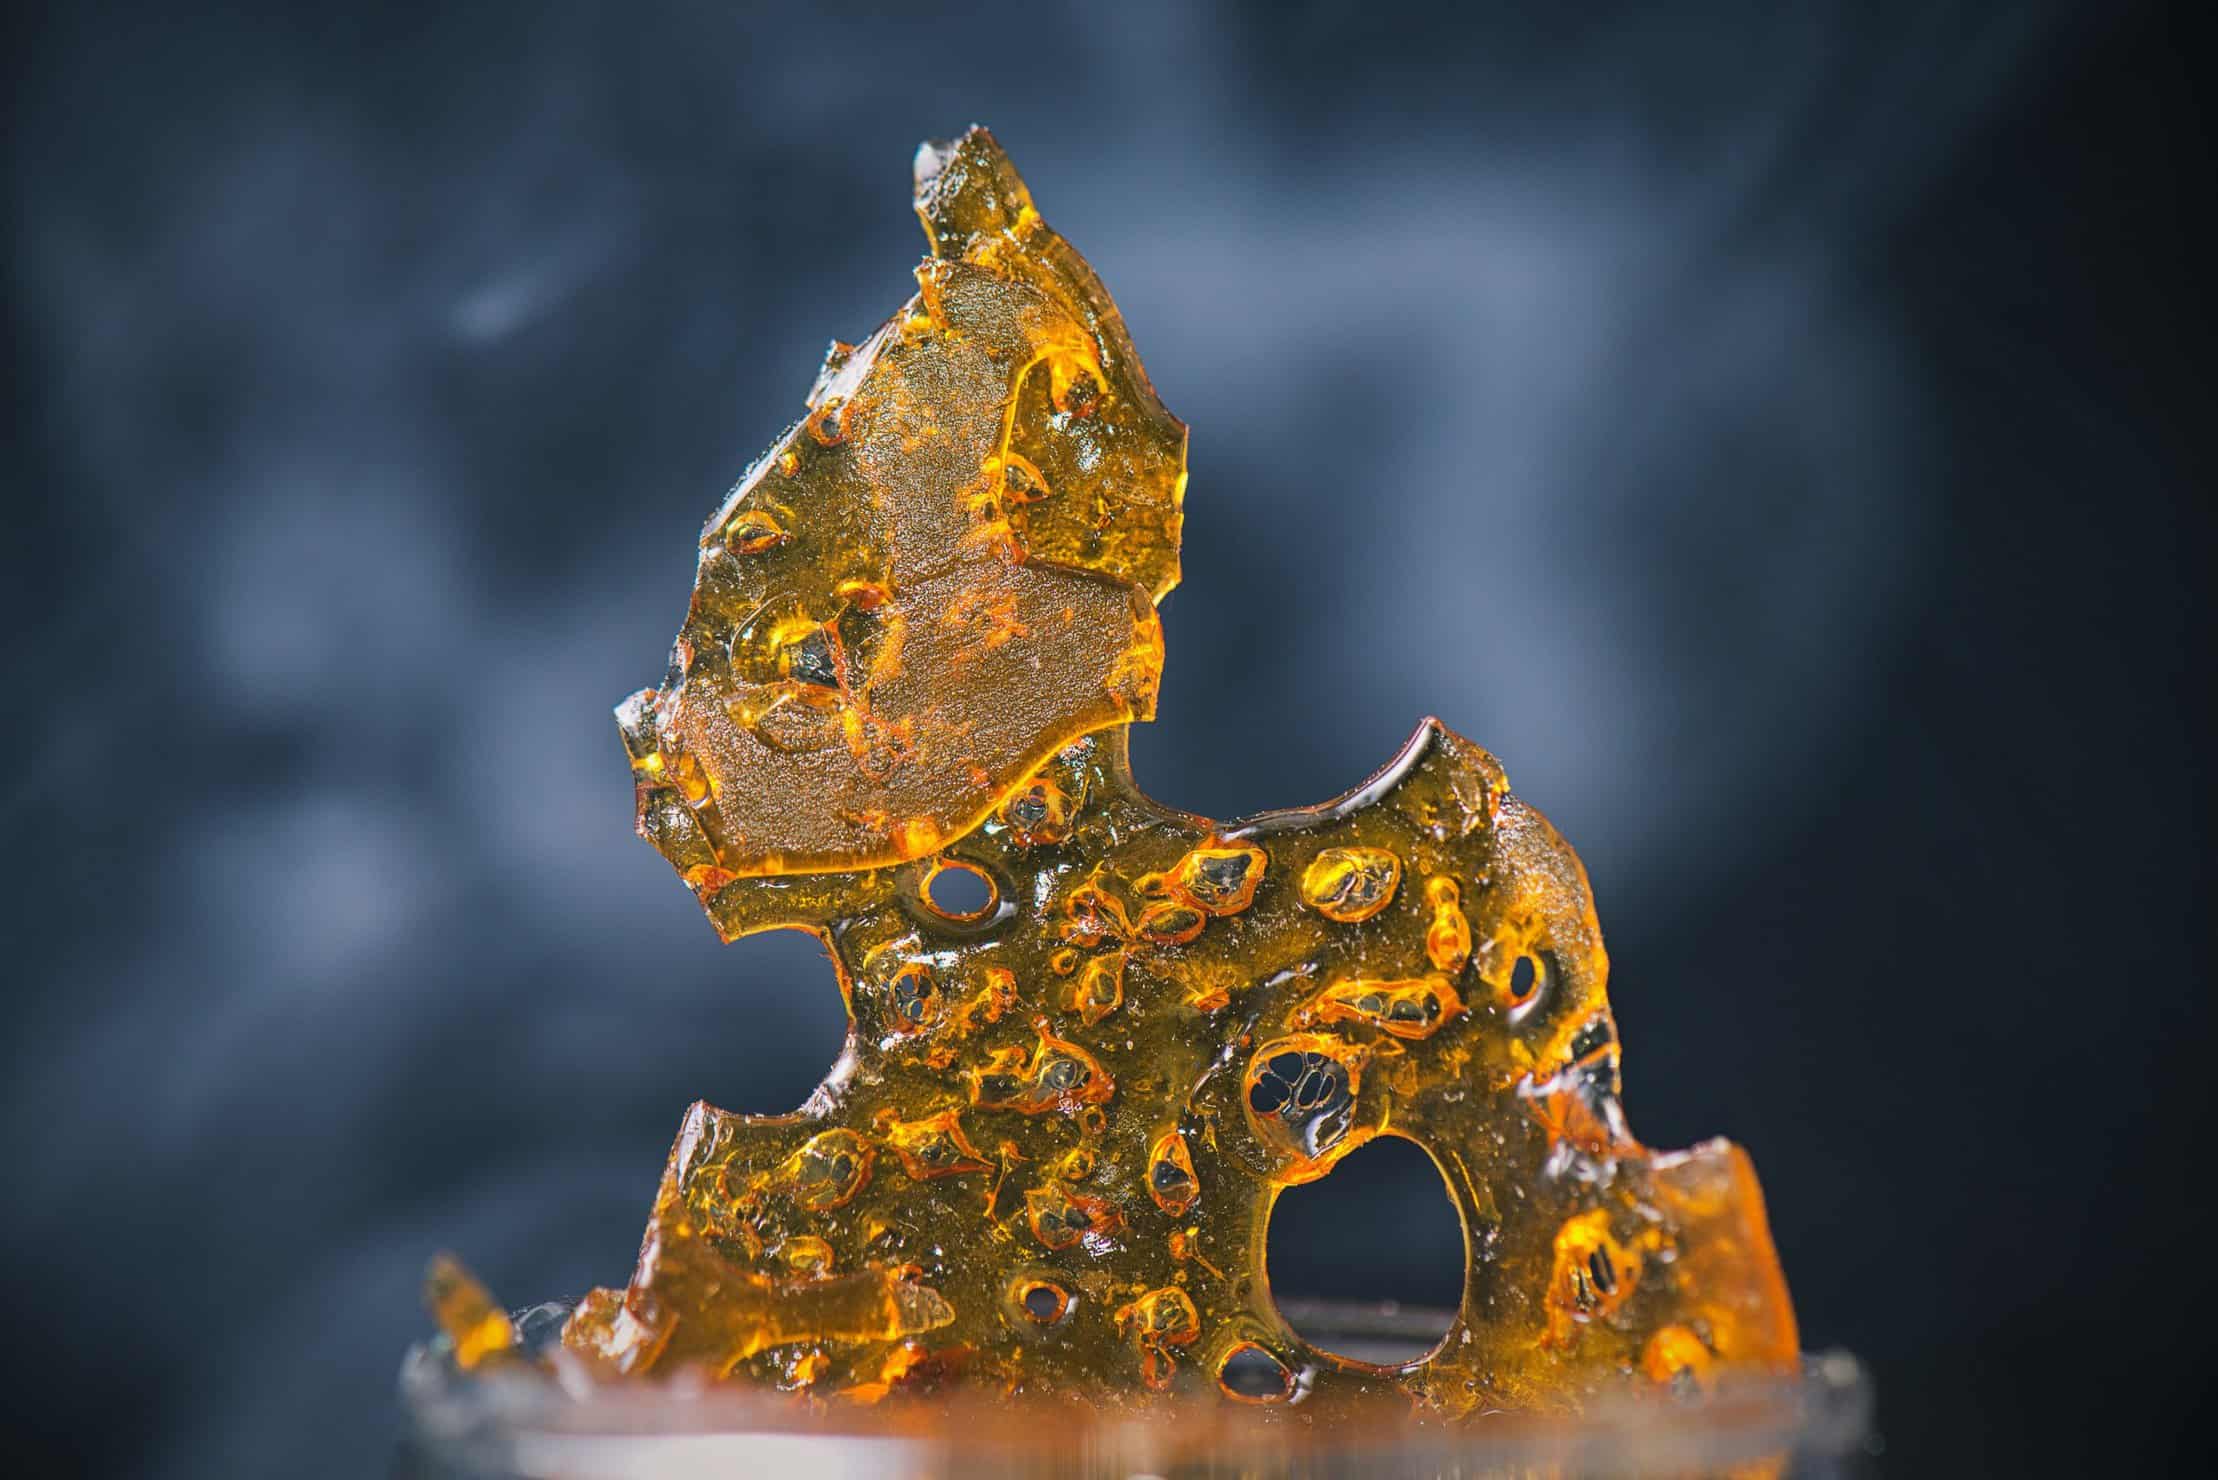 Shatter, Wax, and Rosin: Know Your Cannabis Concentrates